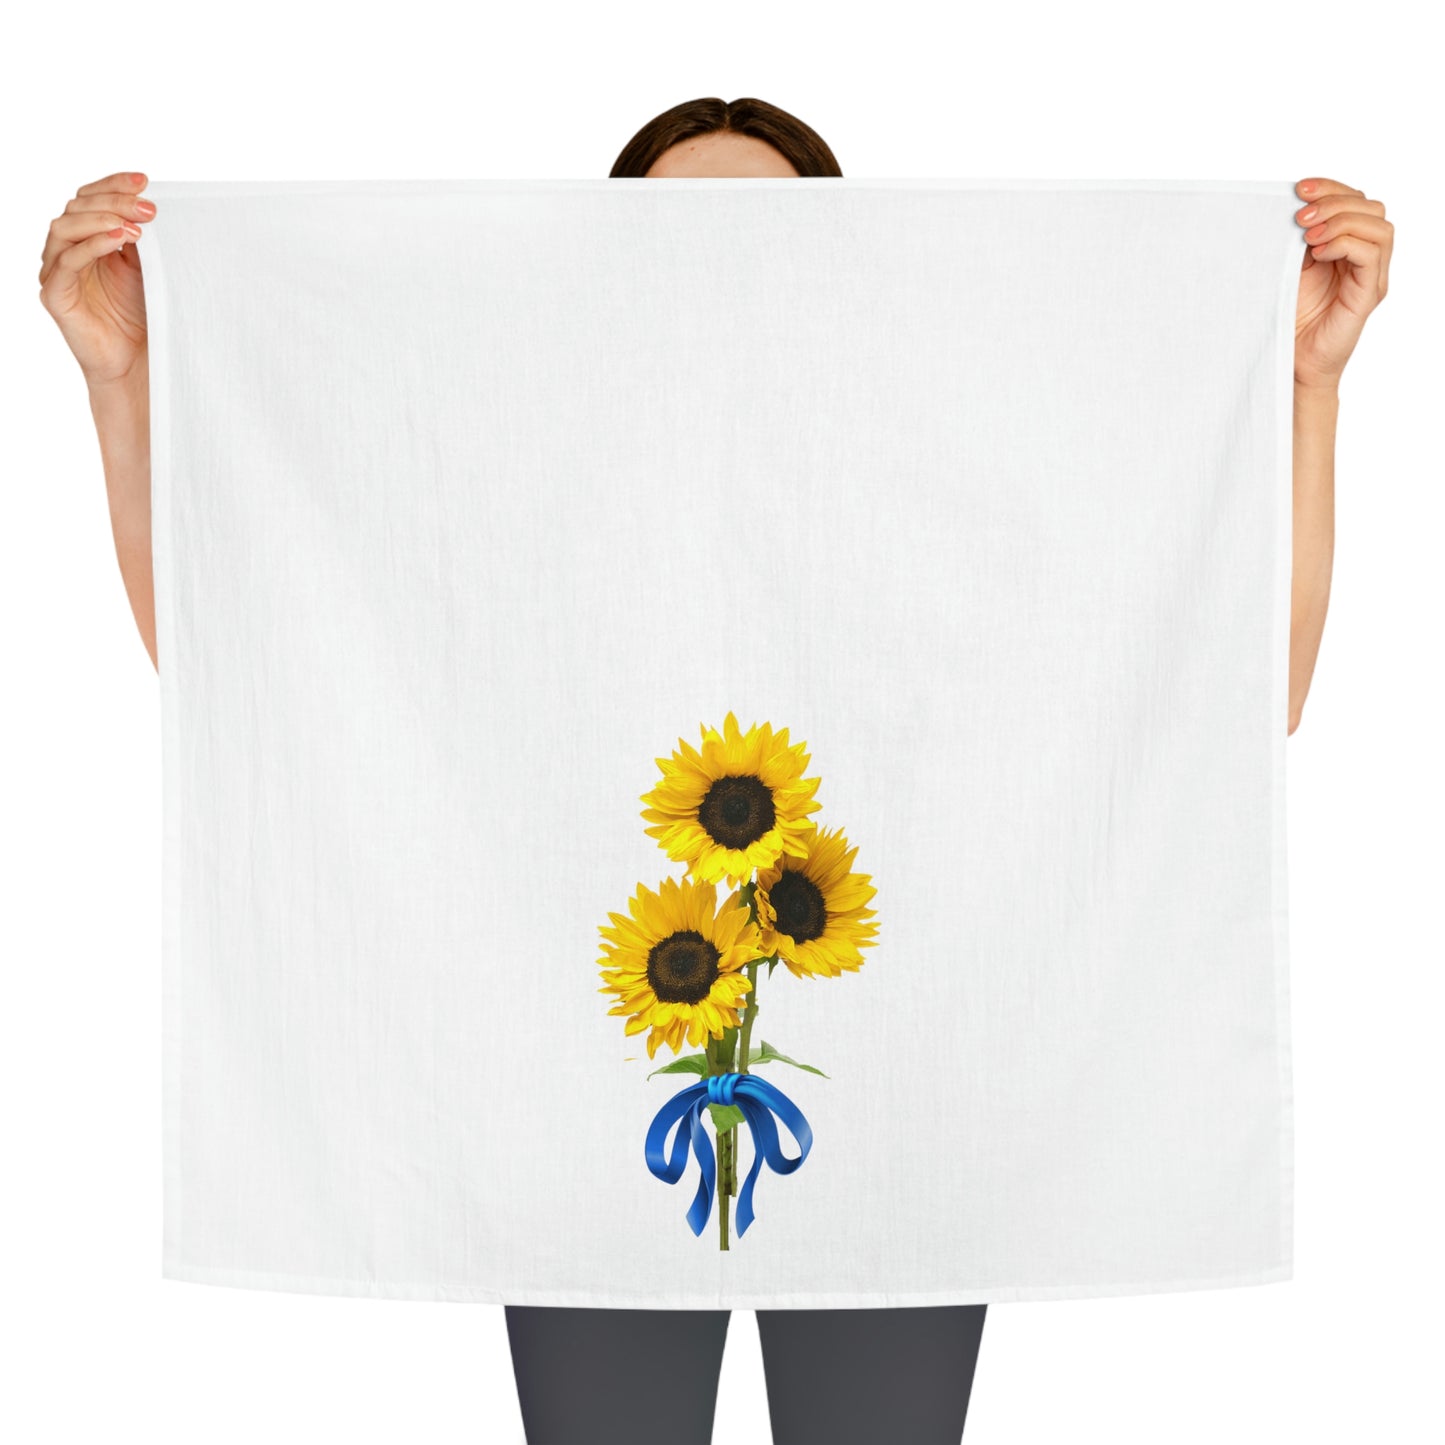 Towel being held by someone showing placement of the design